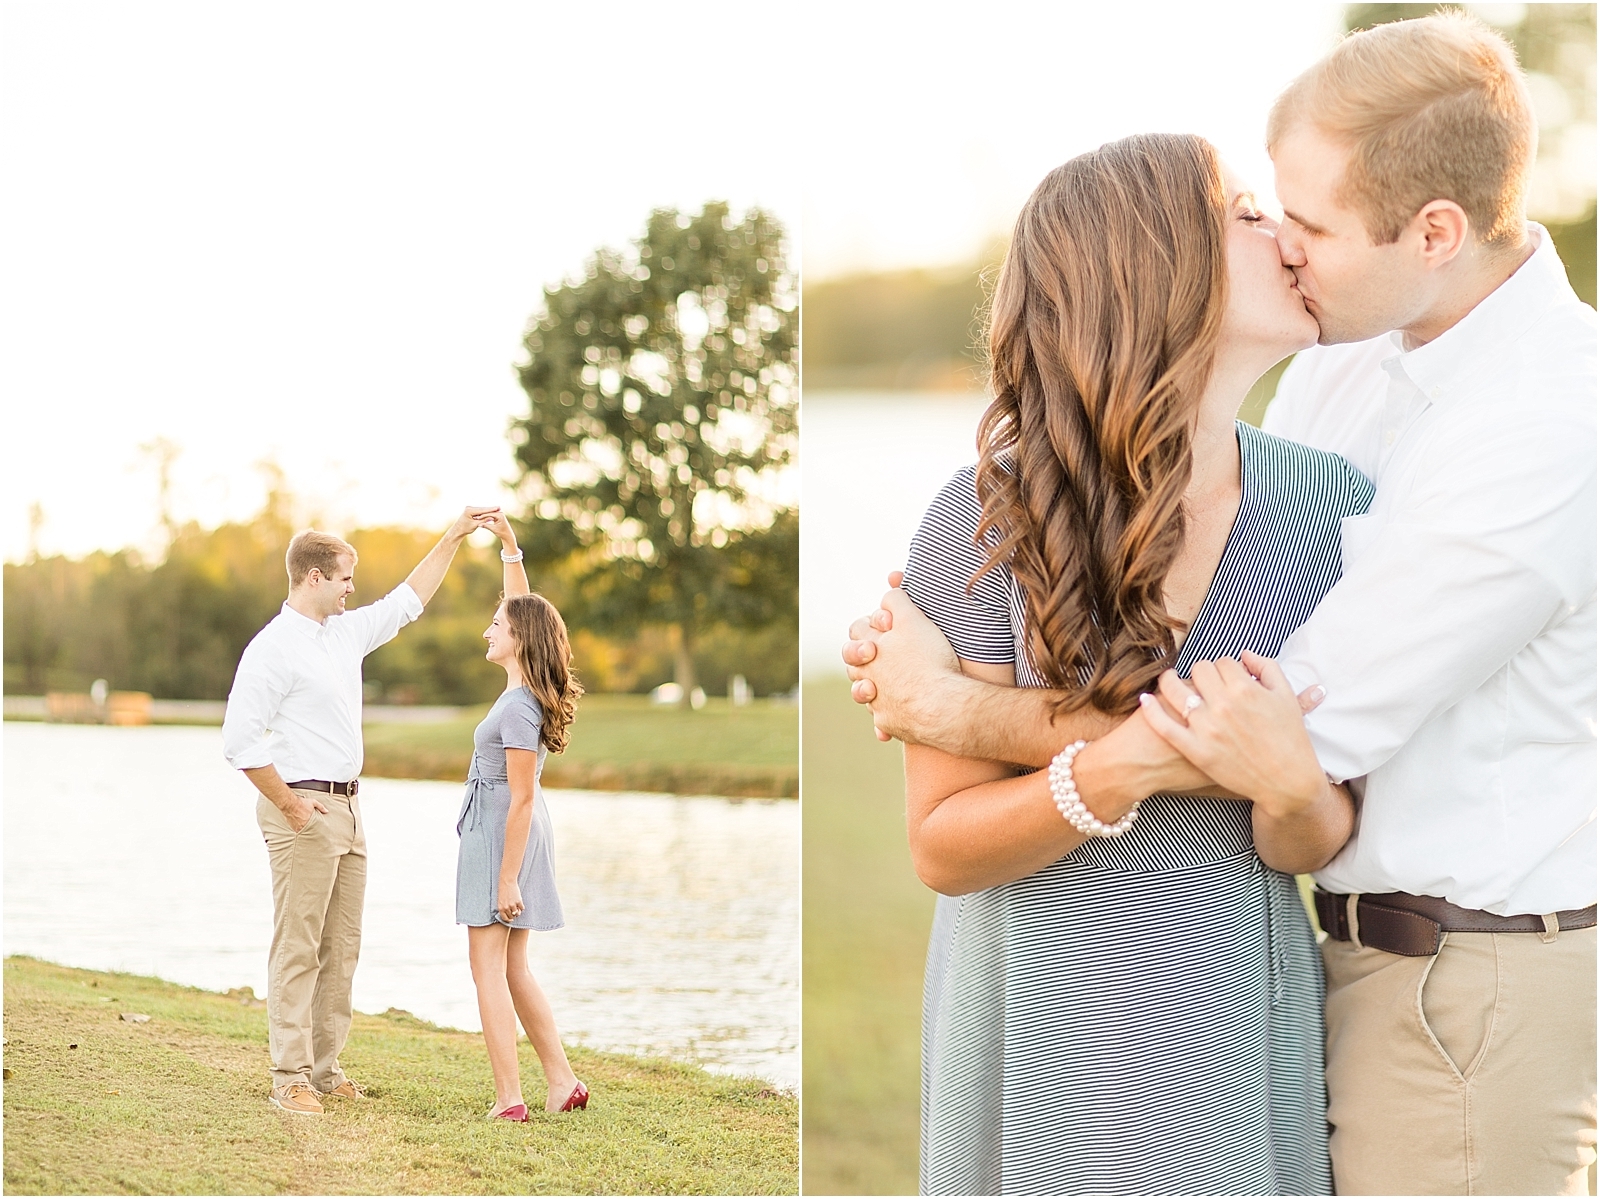 Stacey and Thomas | Engaged0013.jpg